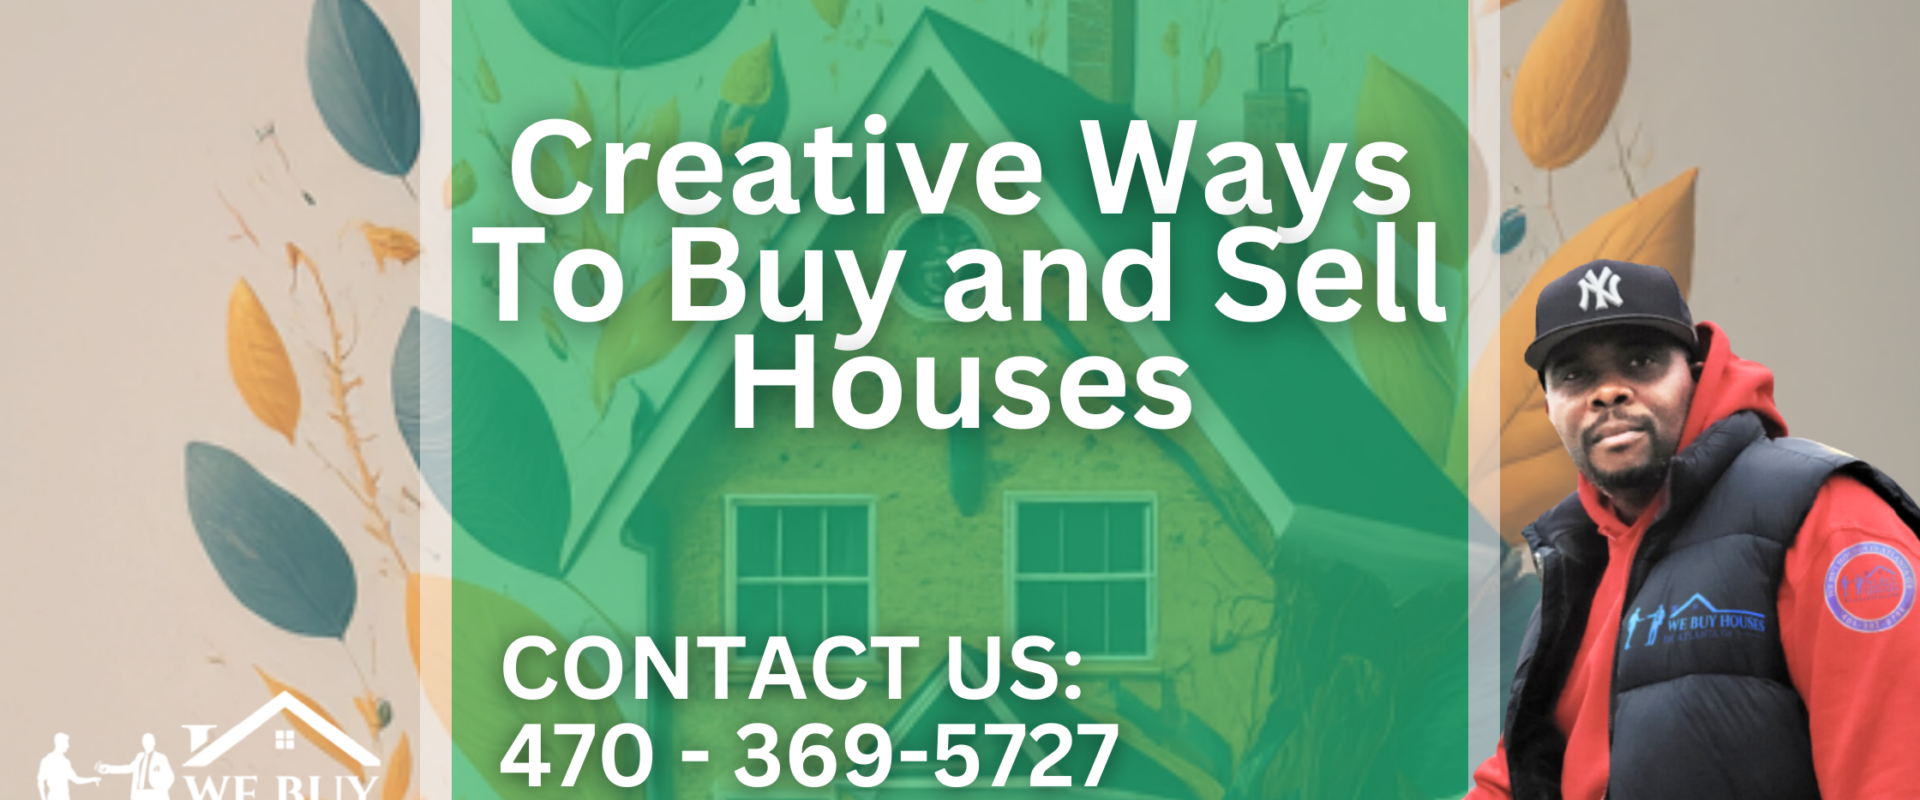 Creative Ways To Buy and Sell Houses